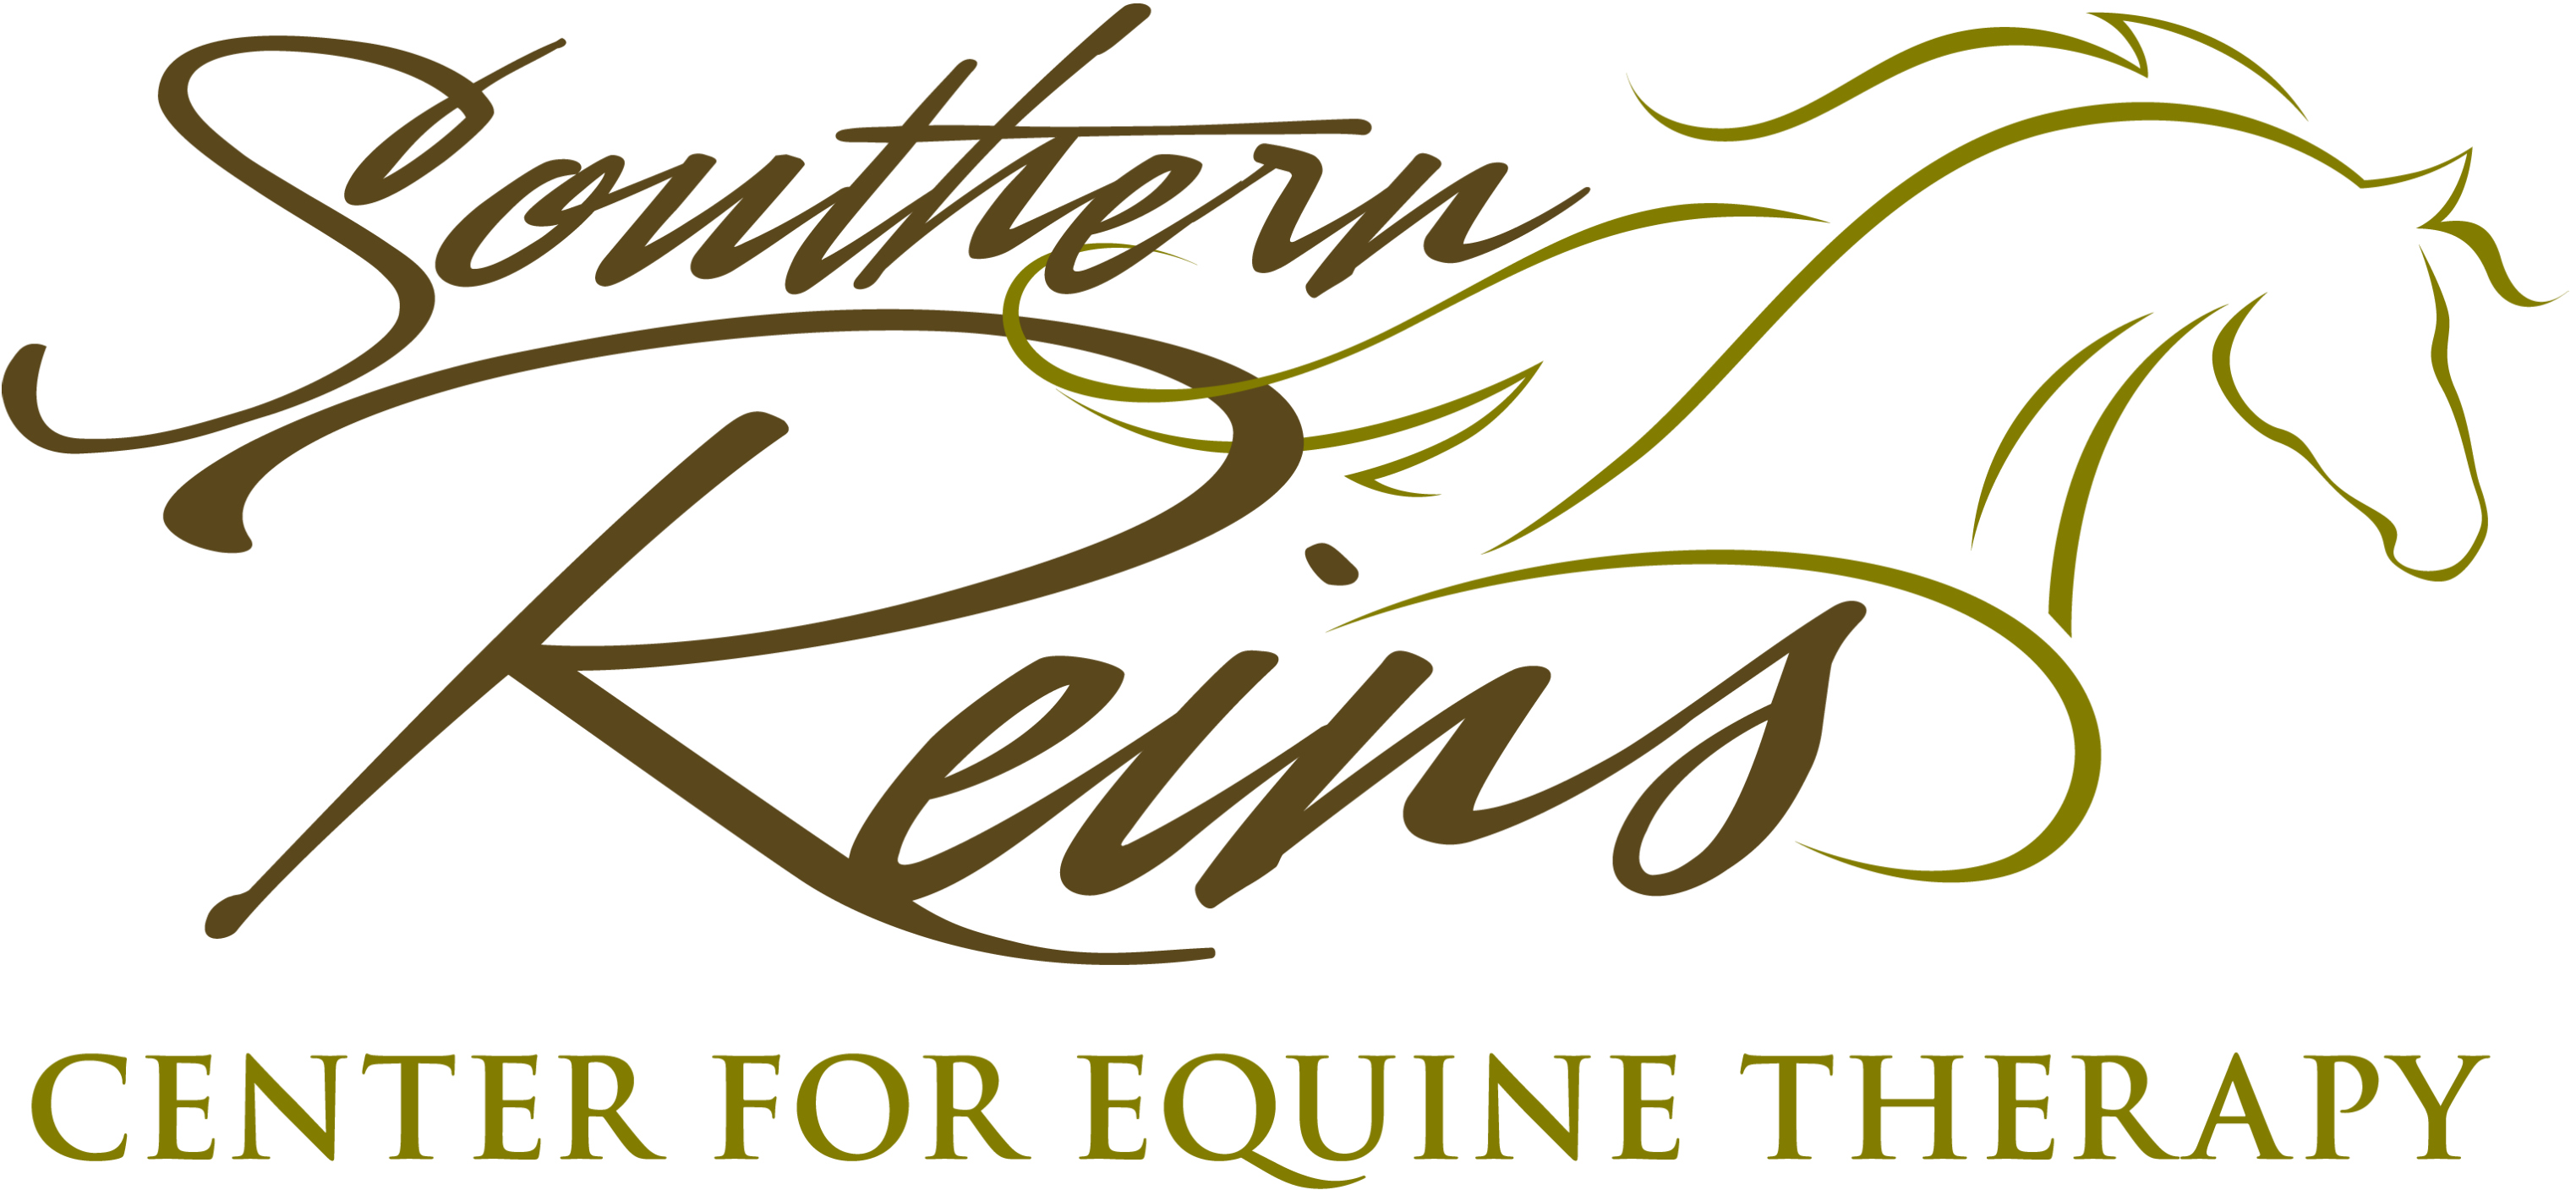 Southern Reins Center for Equine Therapy logo